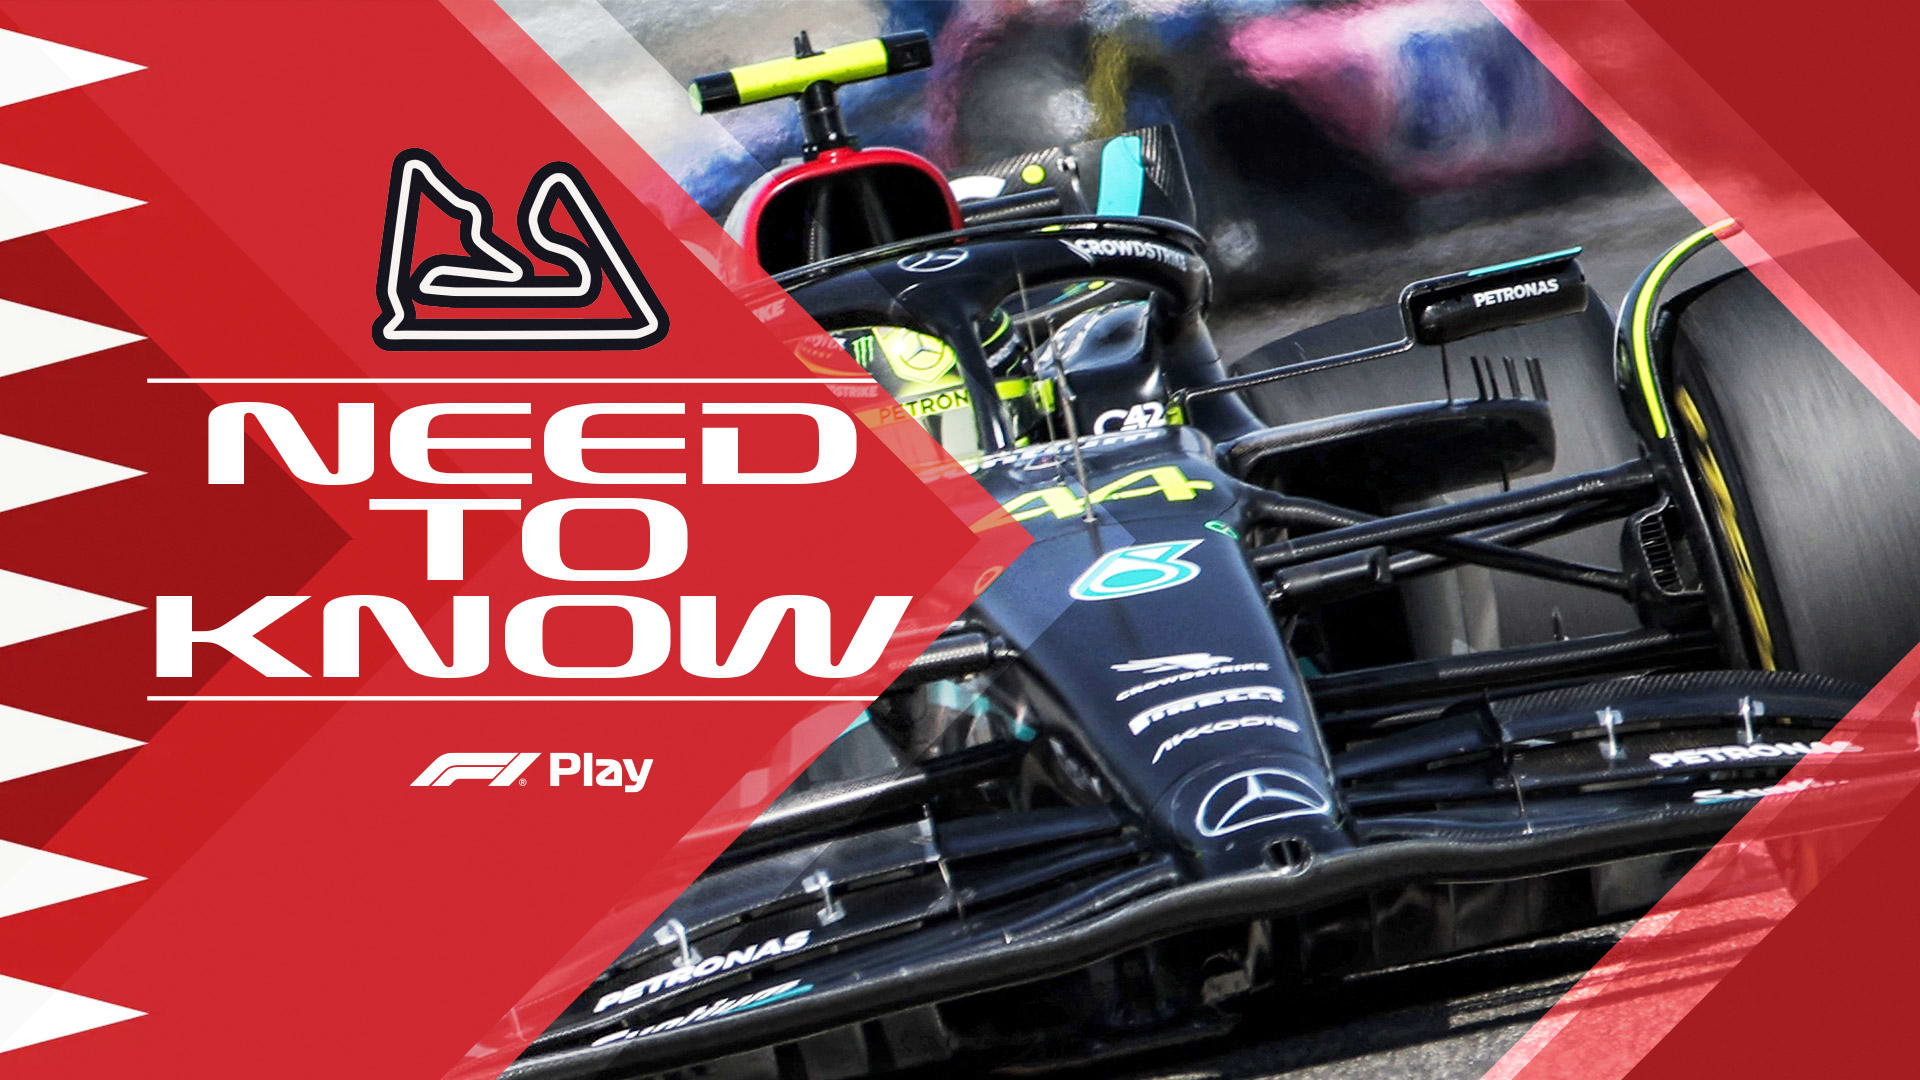 F1 TV Pro: Take race weekend to the next level with a 7-day free